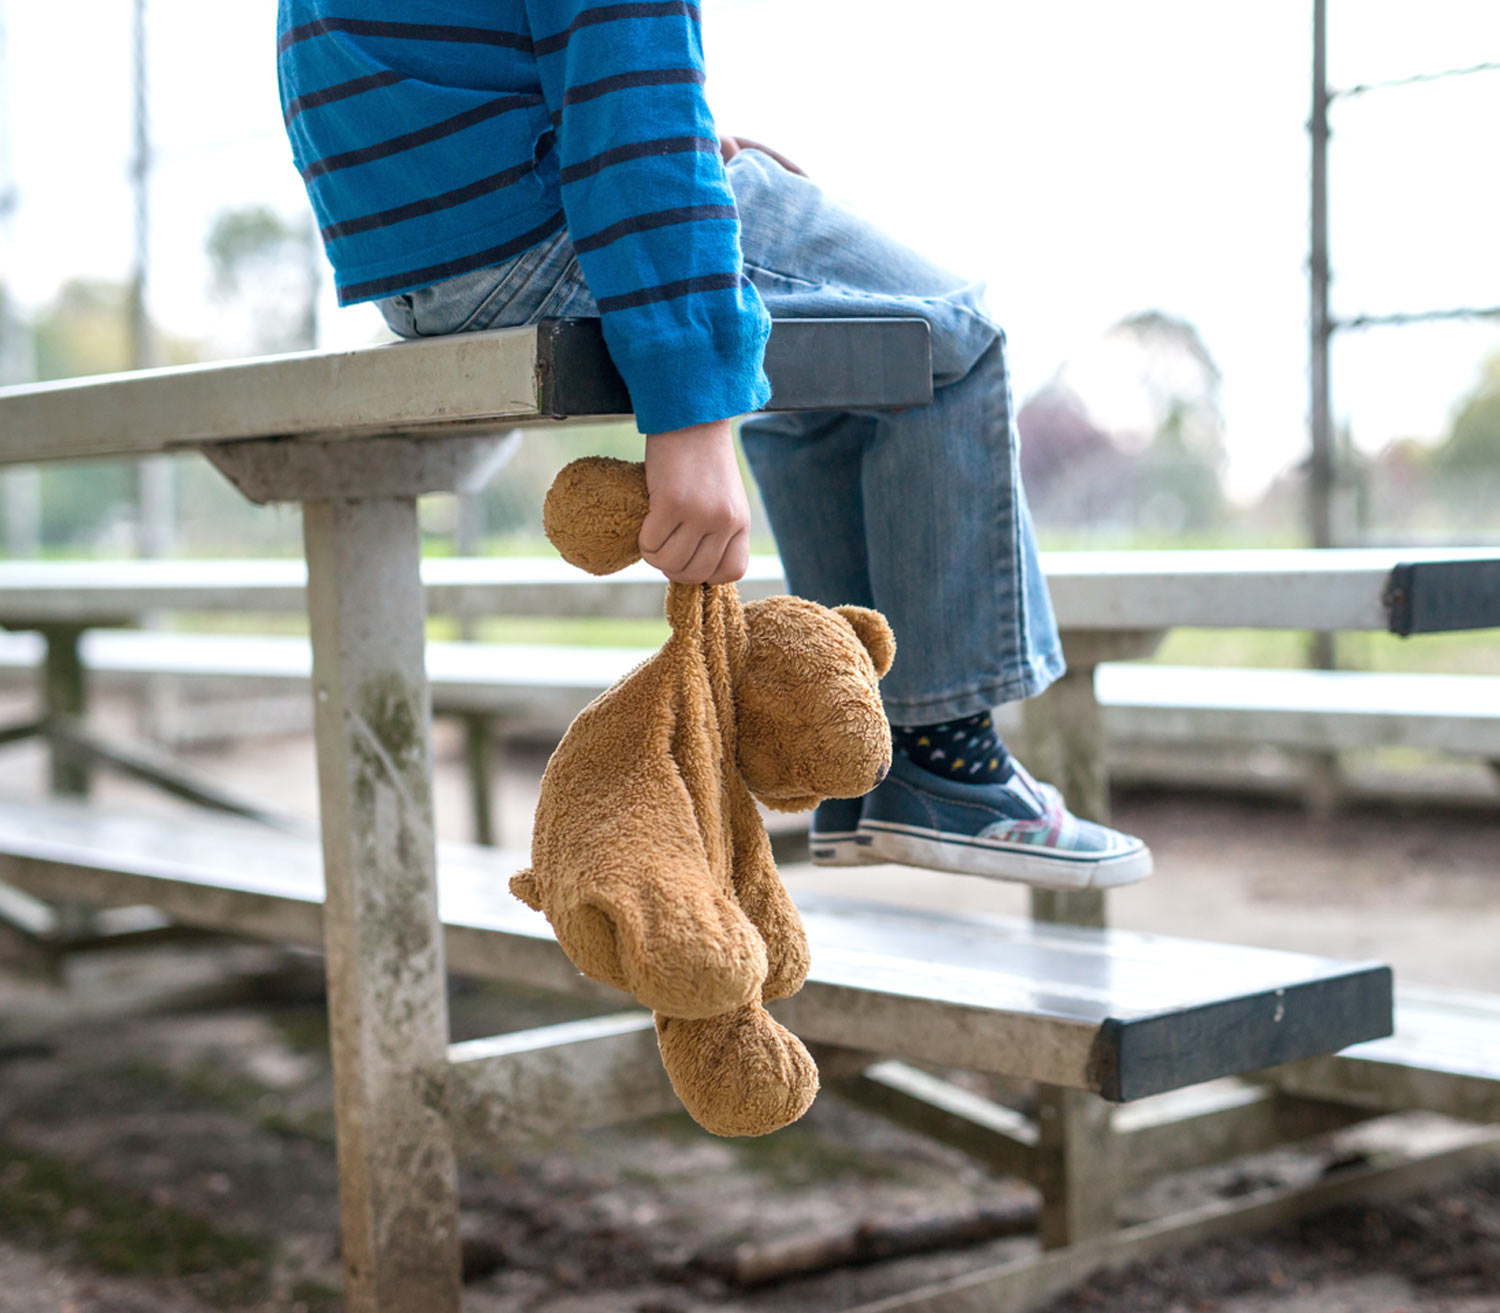 a child sits alone on a bleacher, holding an old teddy bear by the arm